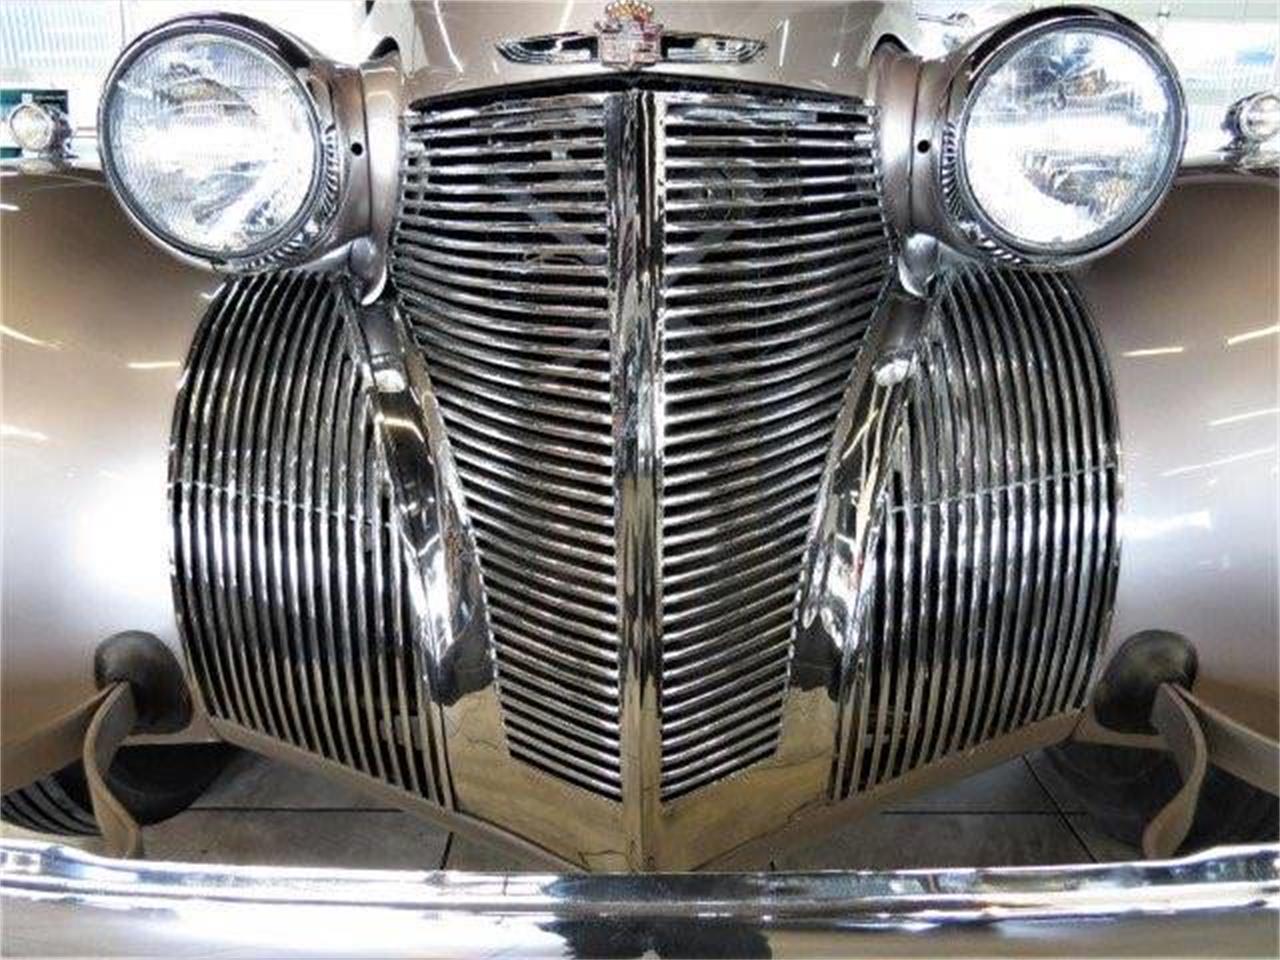 1939 Cadillac Sixty Special for sale in St. Charles, IL – photo 7